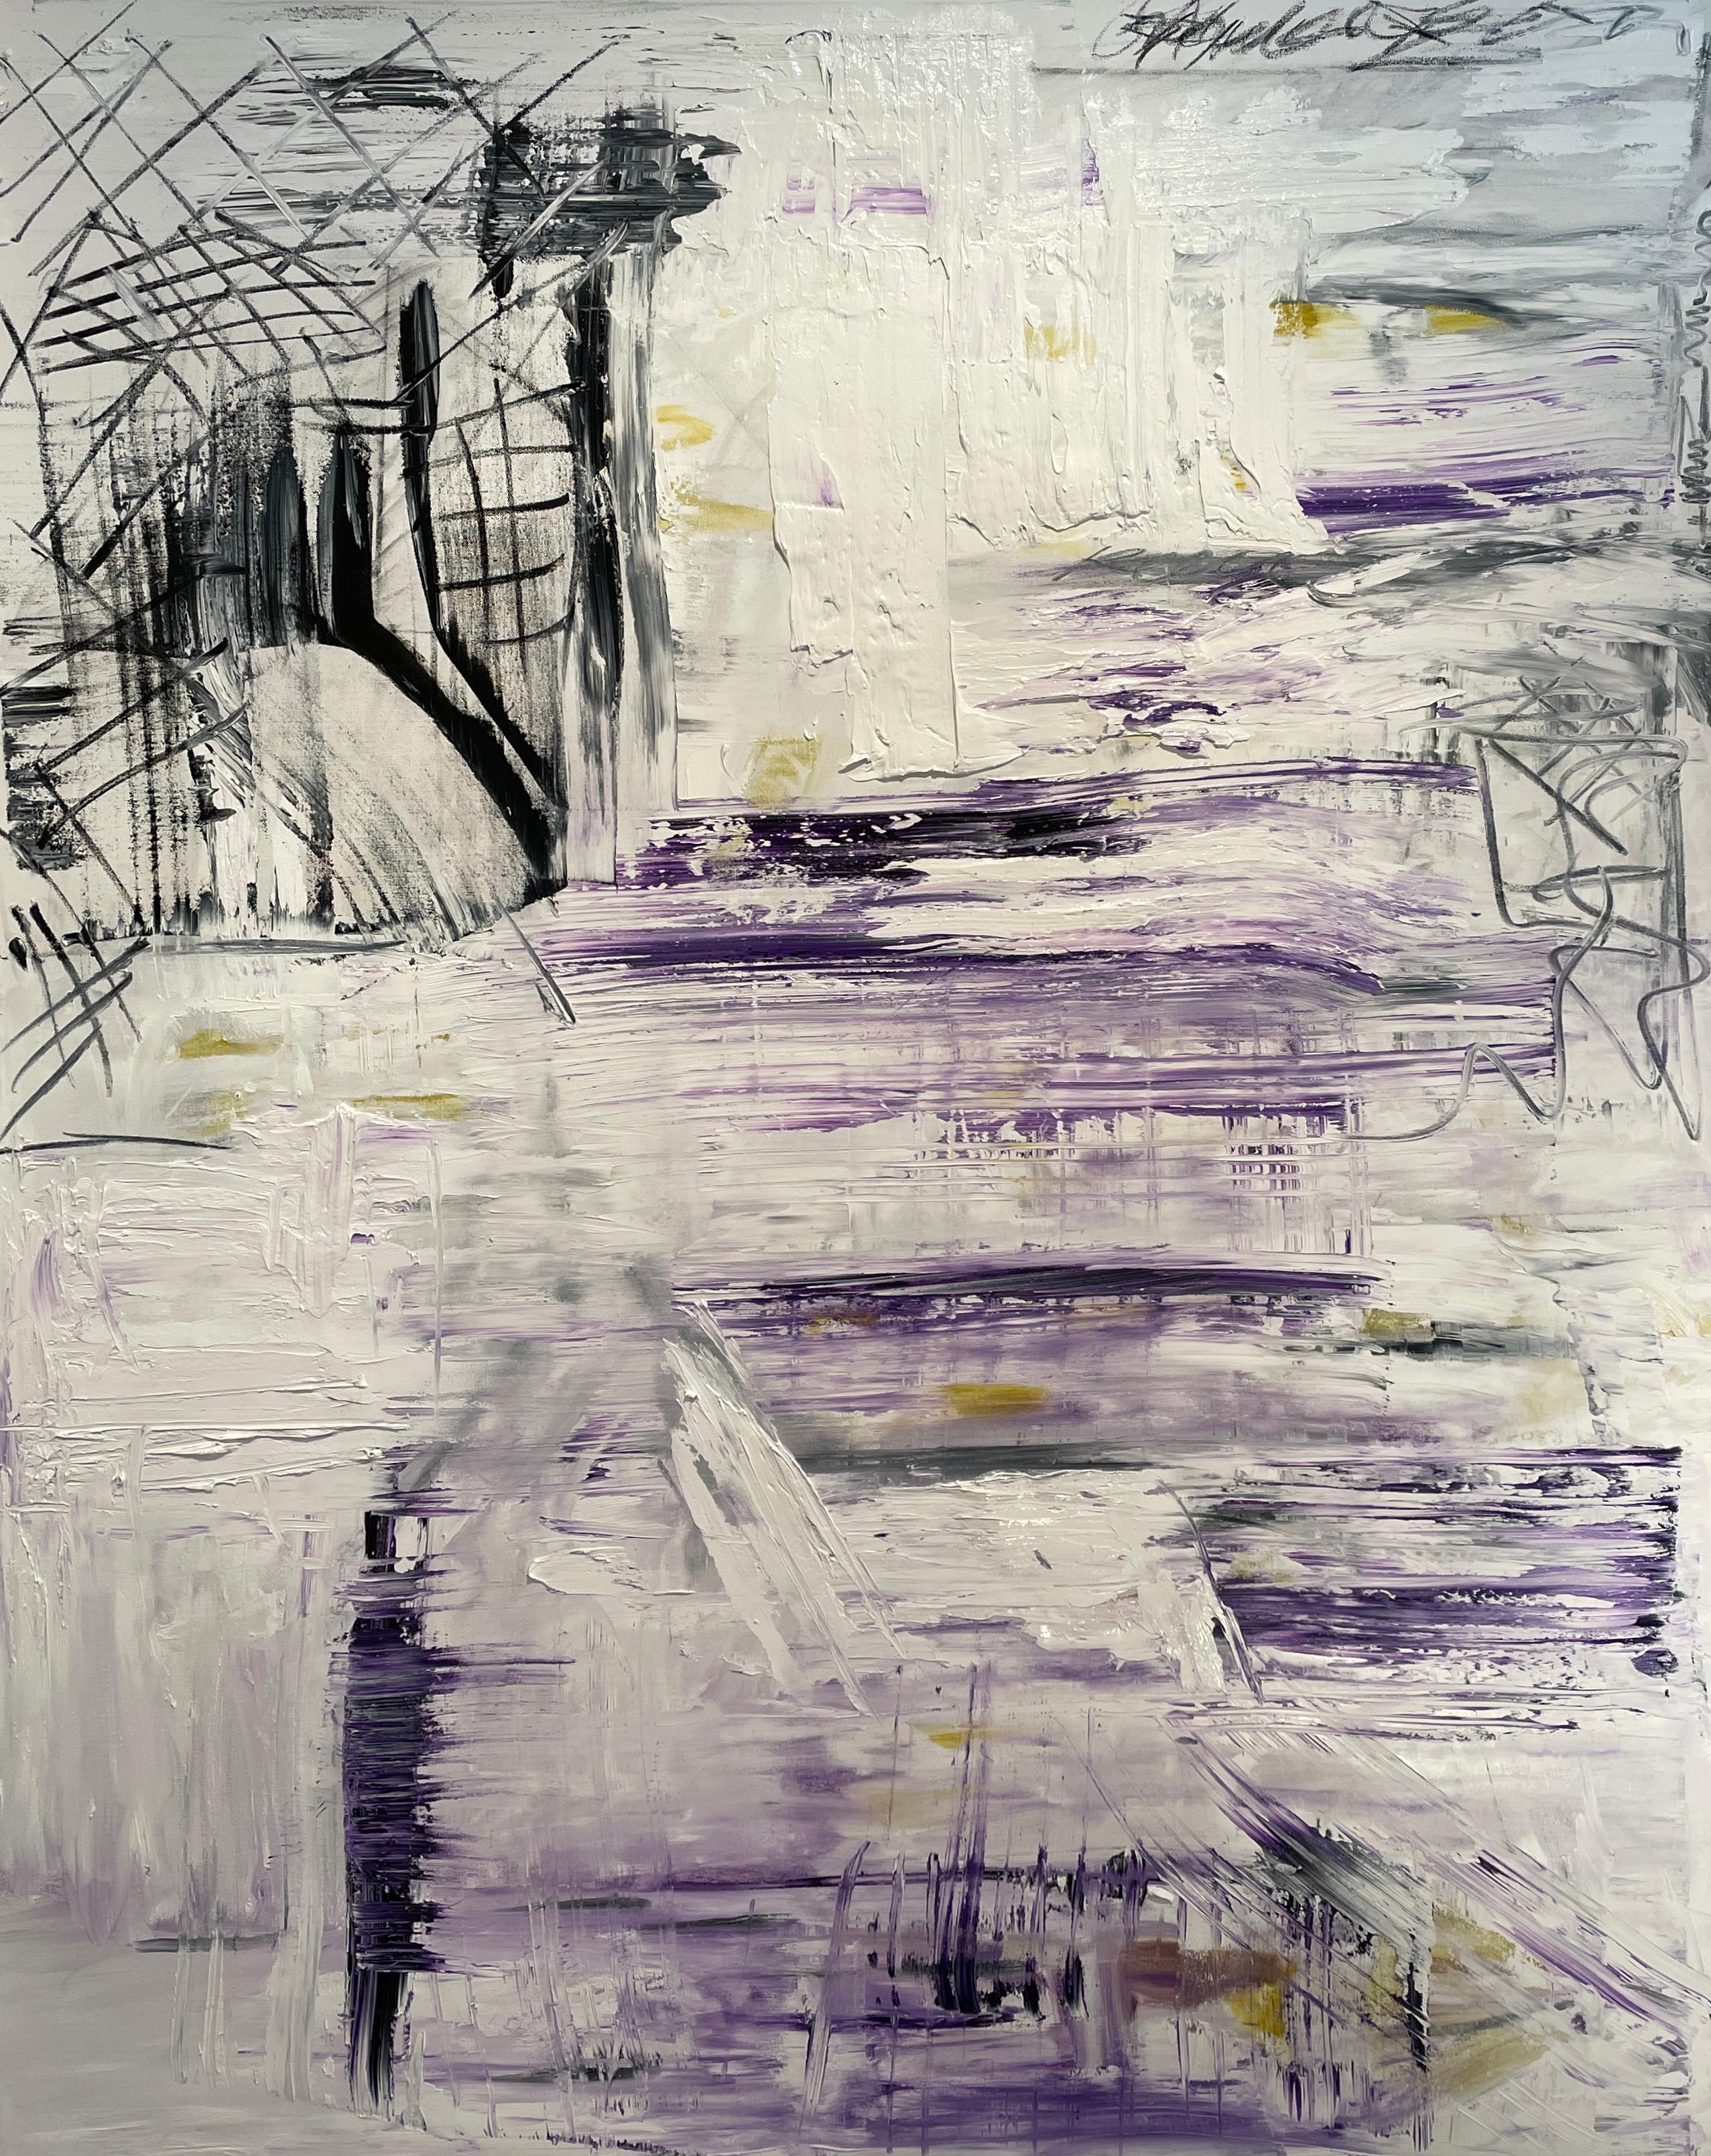 Frida Willis's "Peace" is a 60" x 48" oil on canvas that embodies the raw energy and spontaneity of contemporary abstract expressionism. The piece is swathed in a palette of cool lilac and rich purple, intermingled with bold strokes of contrasting